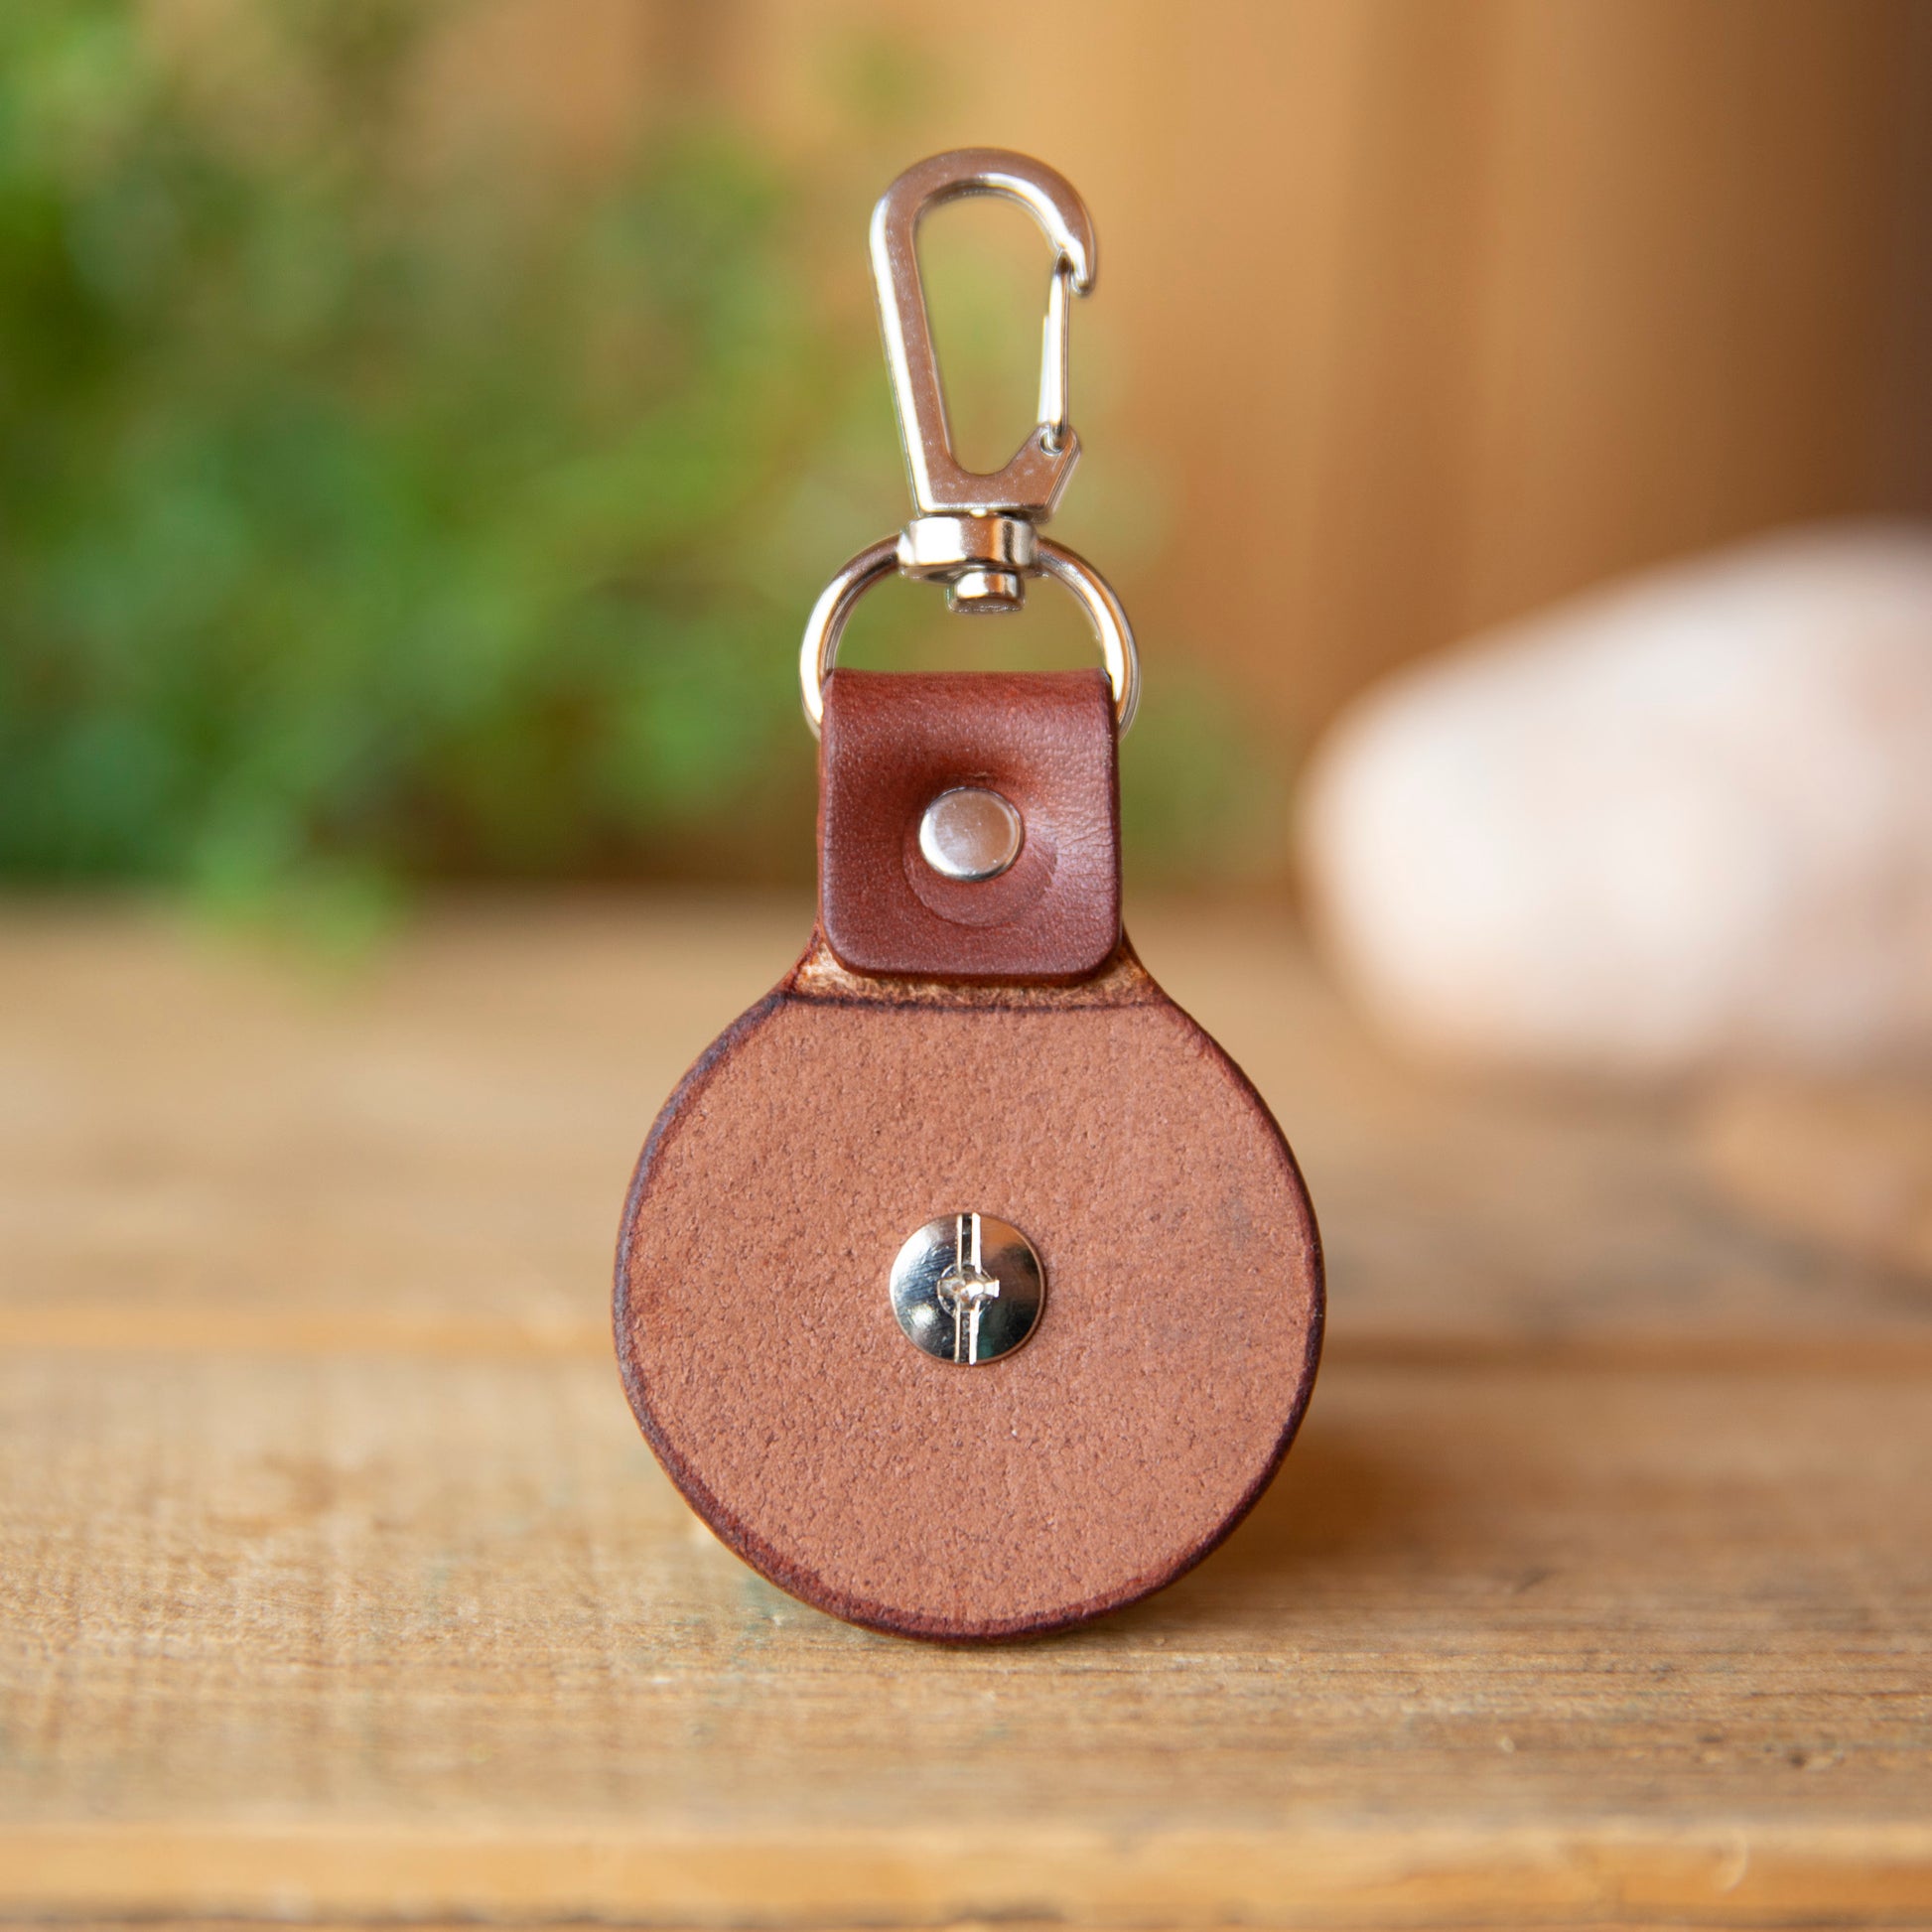 Floral Concho Leather Keyfob - Lazy 3 Leather Company